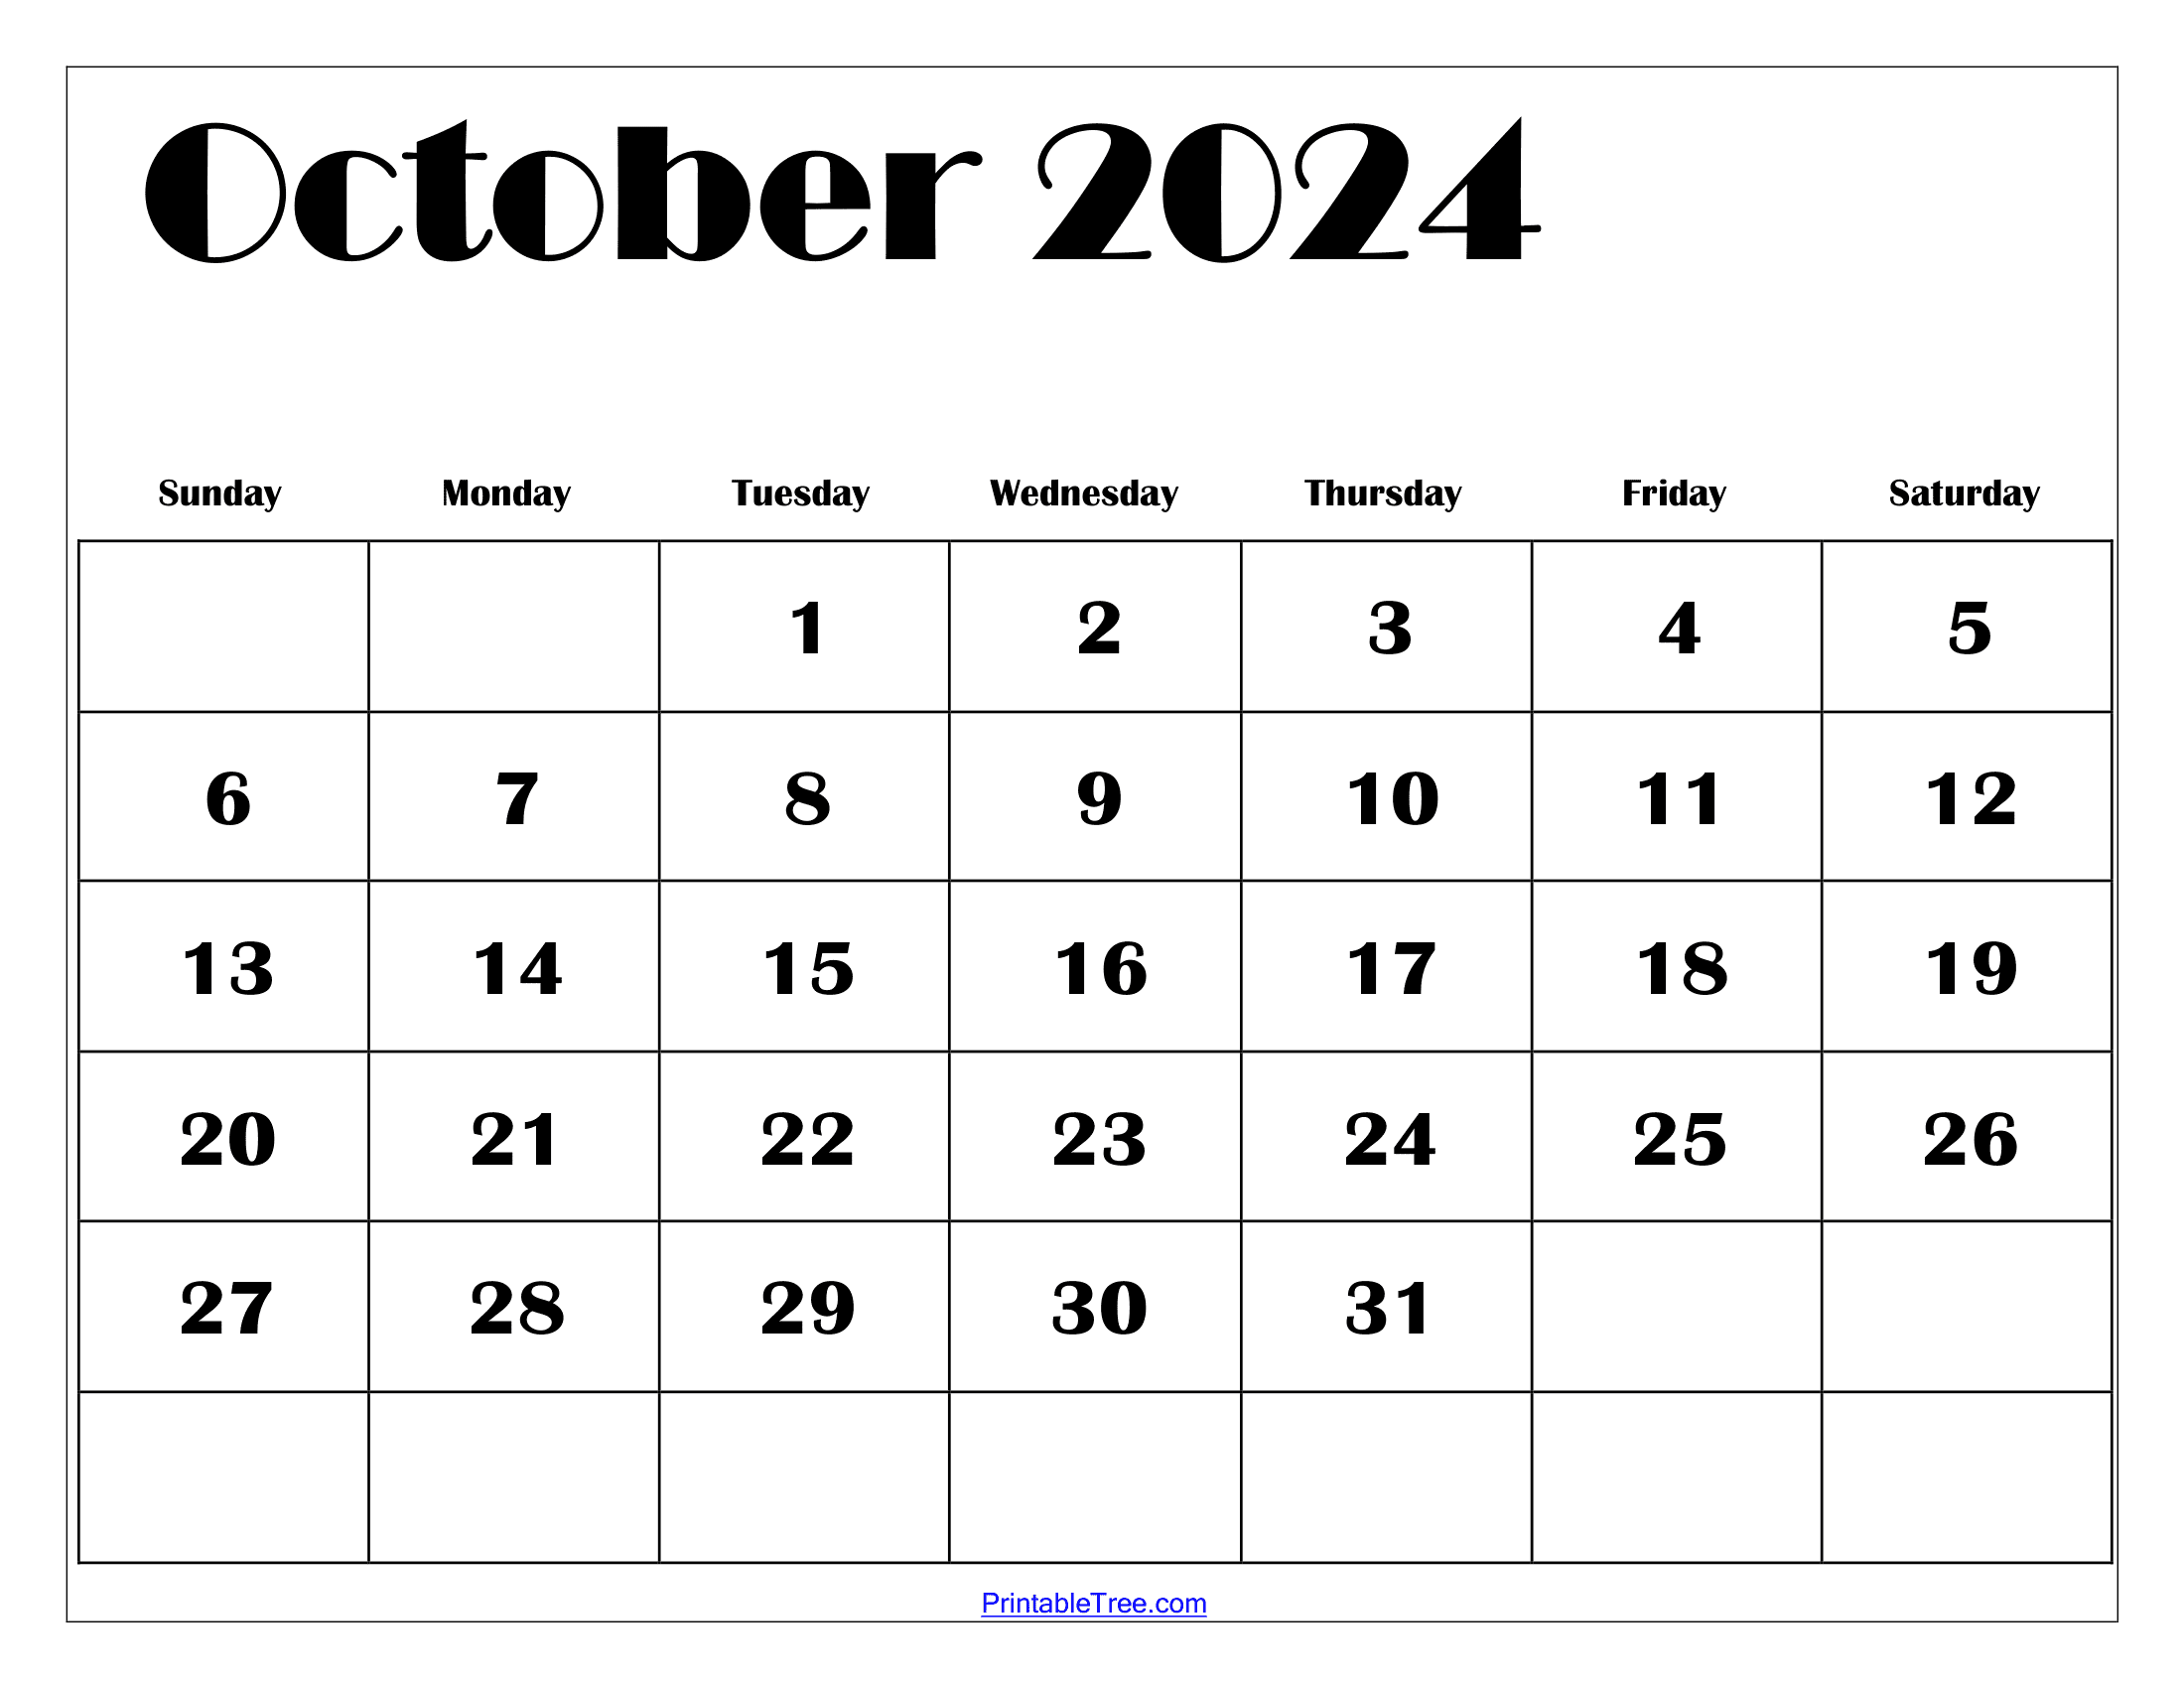 October 2024 Calendar Printable Pdf Free Templates With Holidays in Free Printable Blank Calendar October 2024